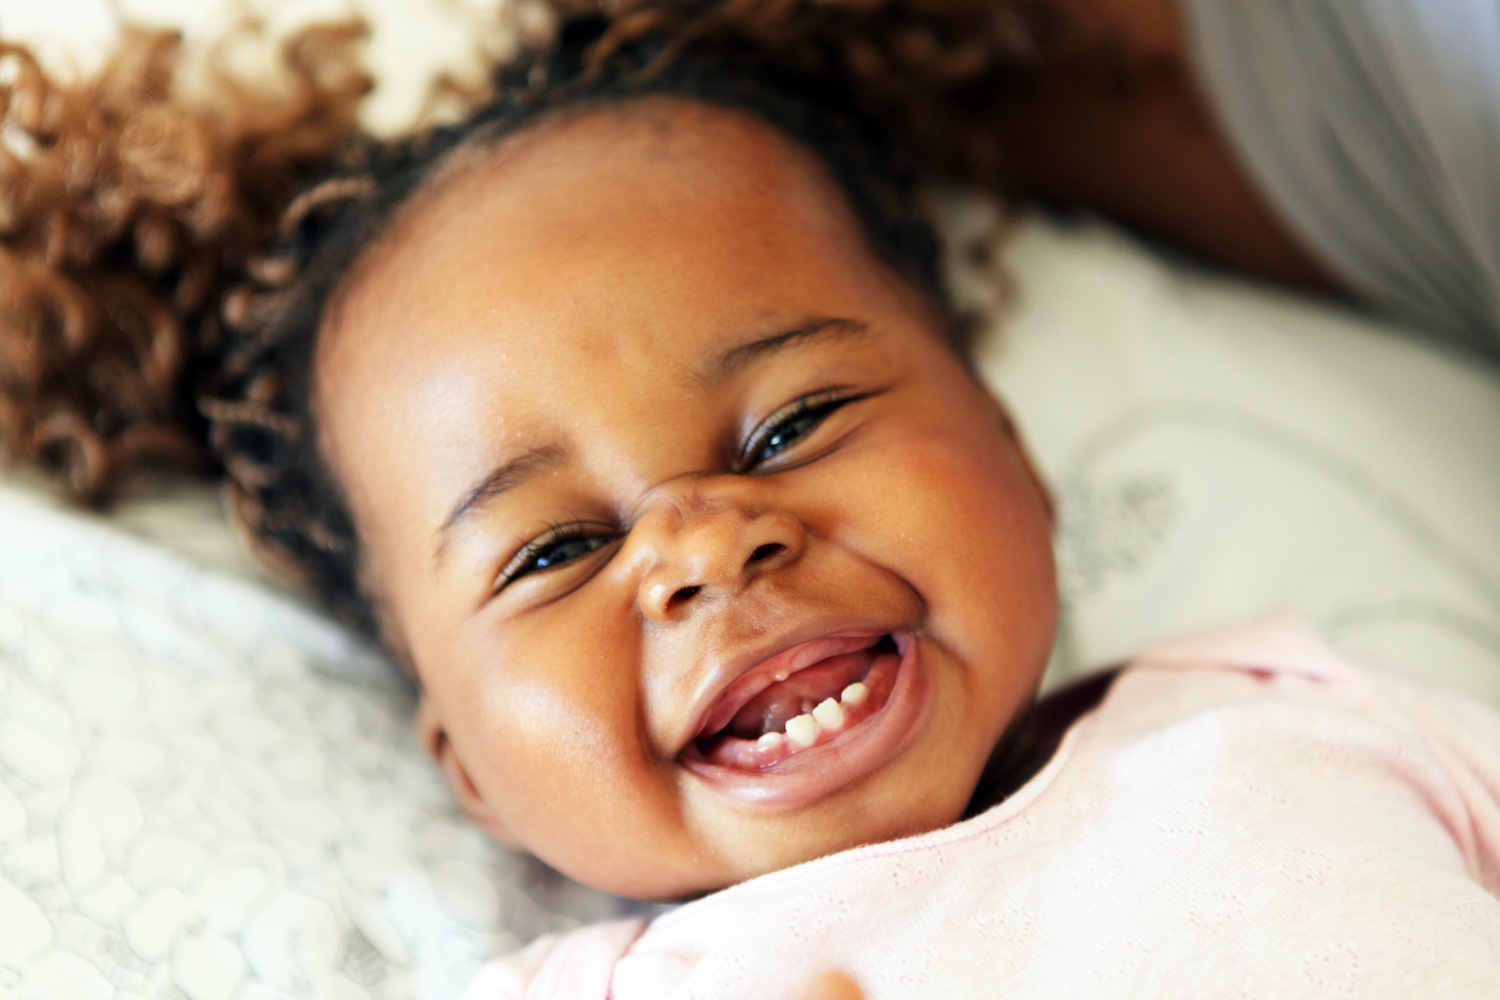 Closeup Of A Young Baby Smiling With Her Bottom Baby Teeth